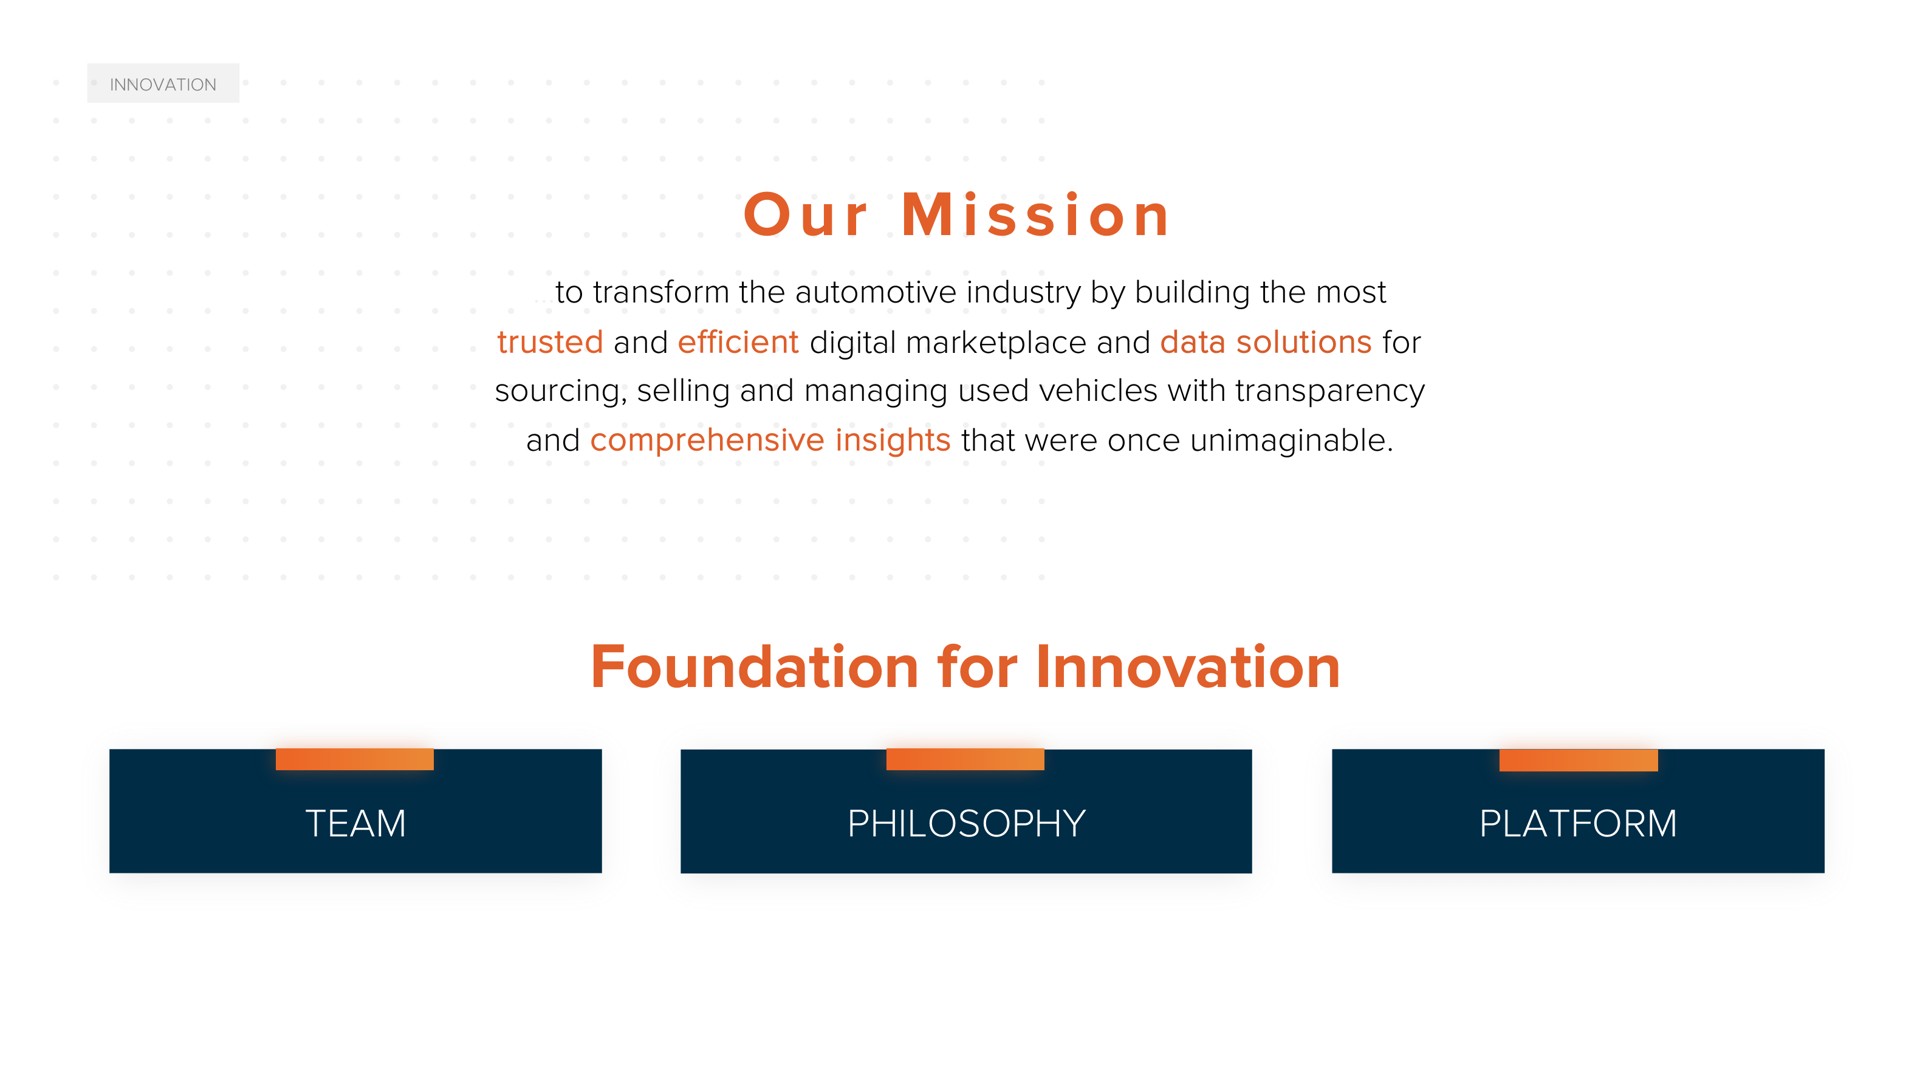 i i foundation for innovation our mission to transform the automotive industry by building the most trusted and efficient digital and data solutions sourcing selling and managing used vehicles with transparency and comprehensive insights that were once unimaginable philosophy so | ACV Auctions